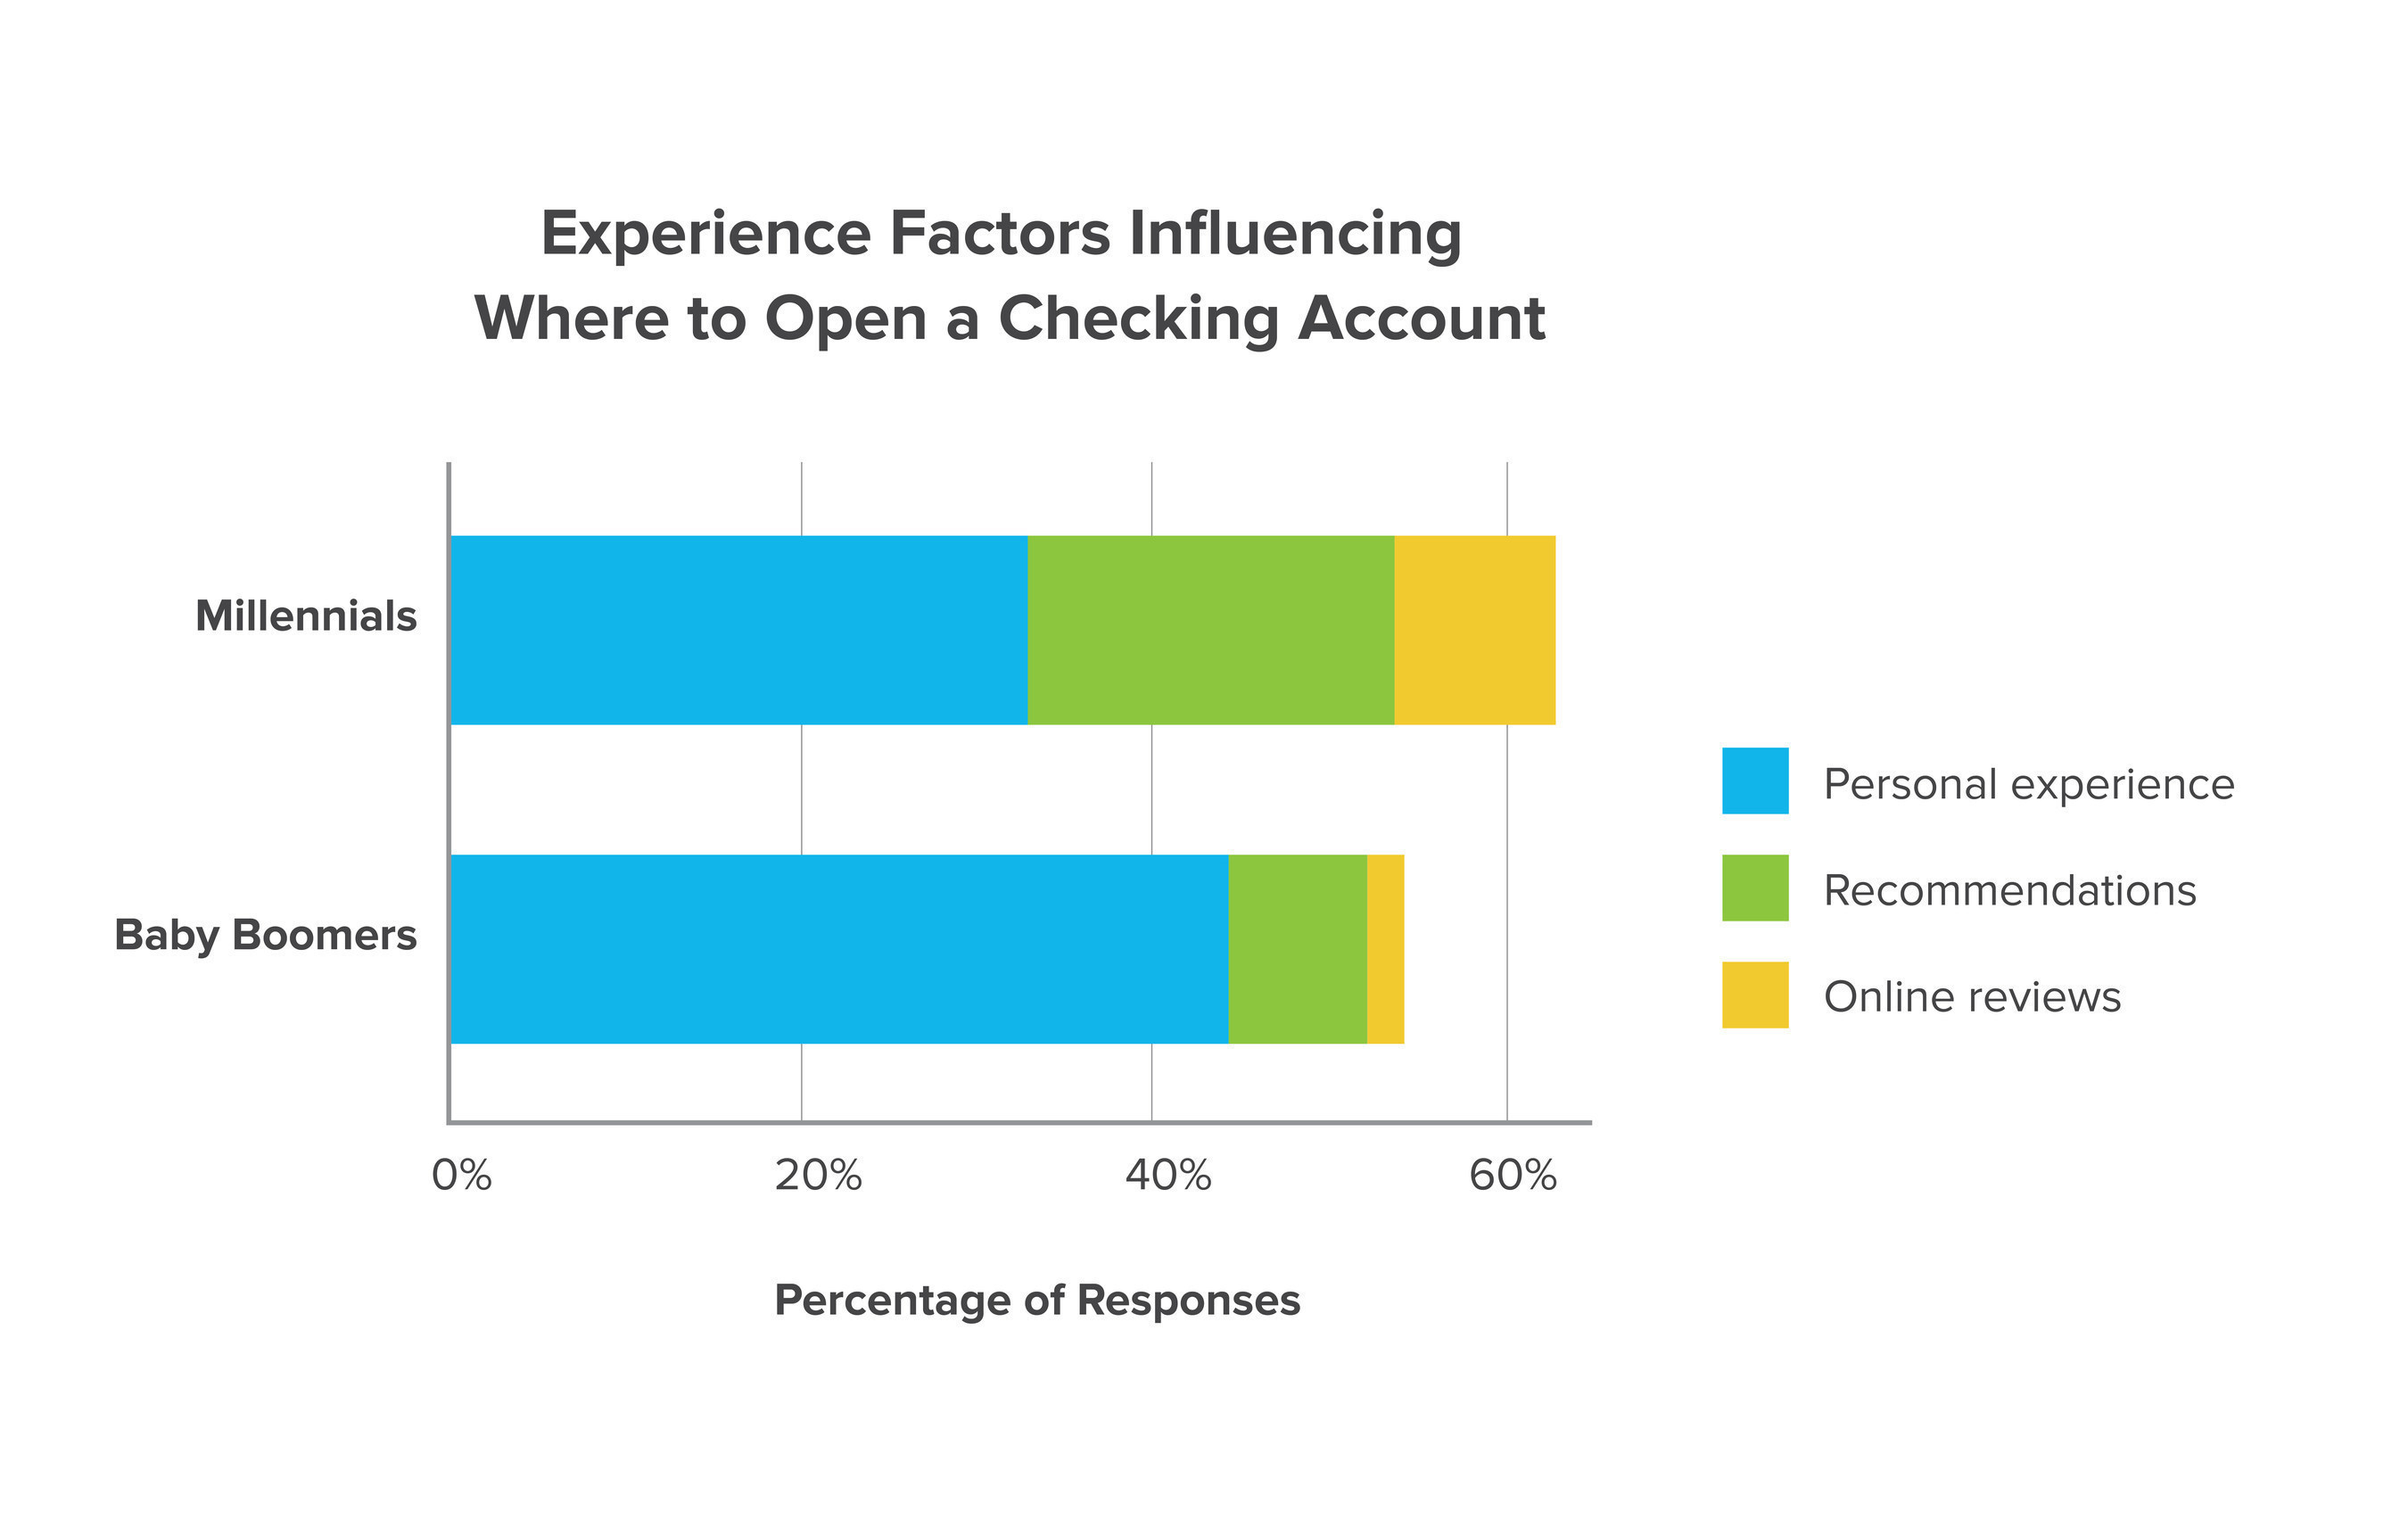 Experience Factors Influencing Where to Open a Checking Account